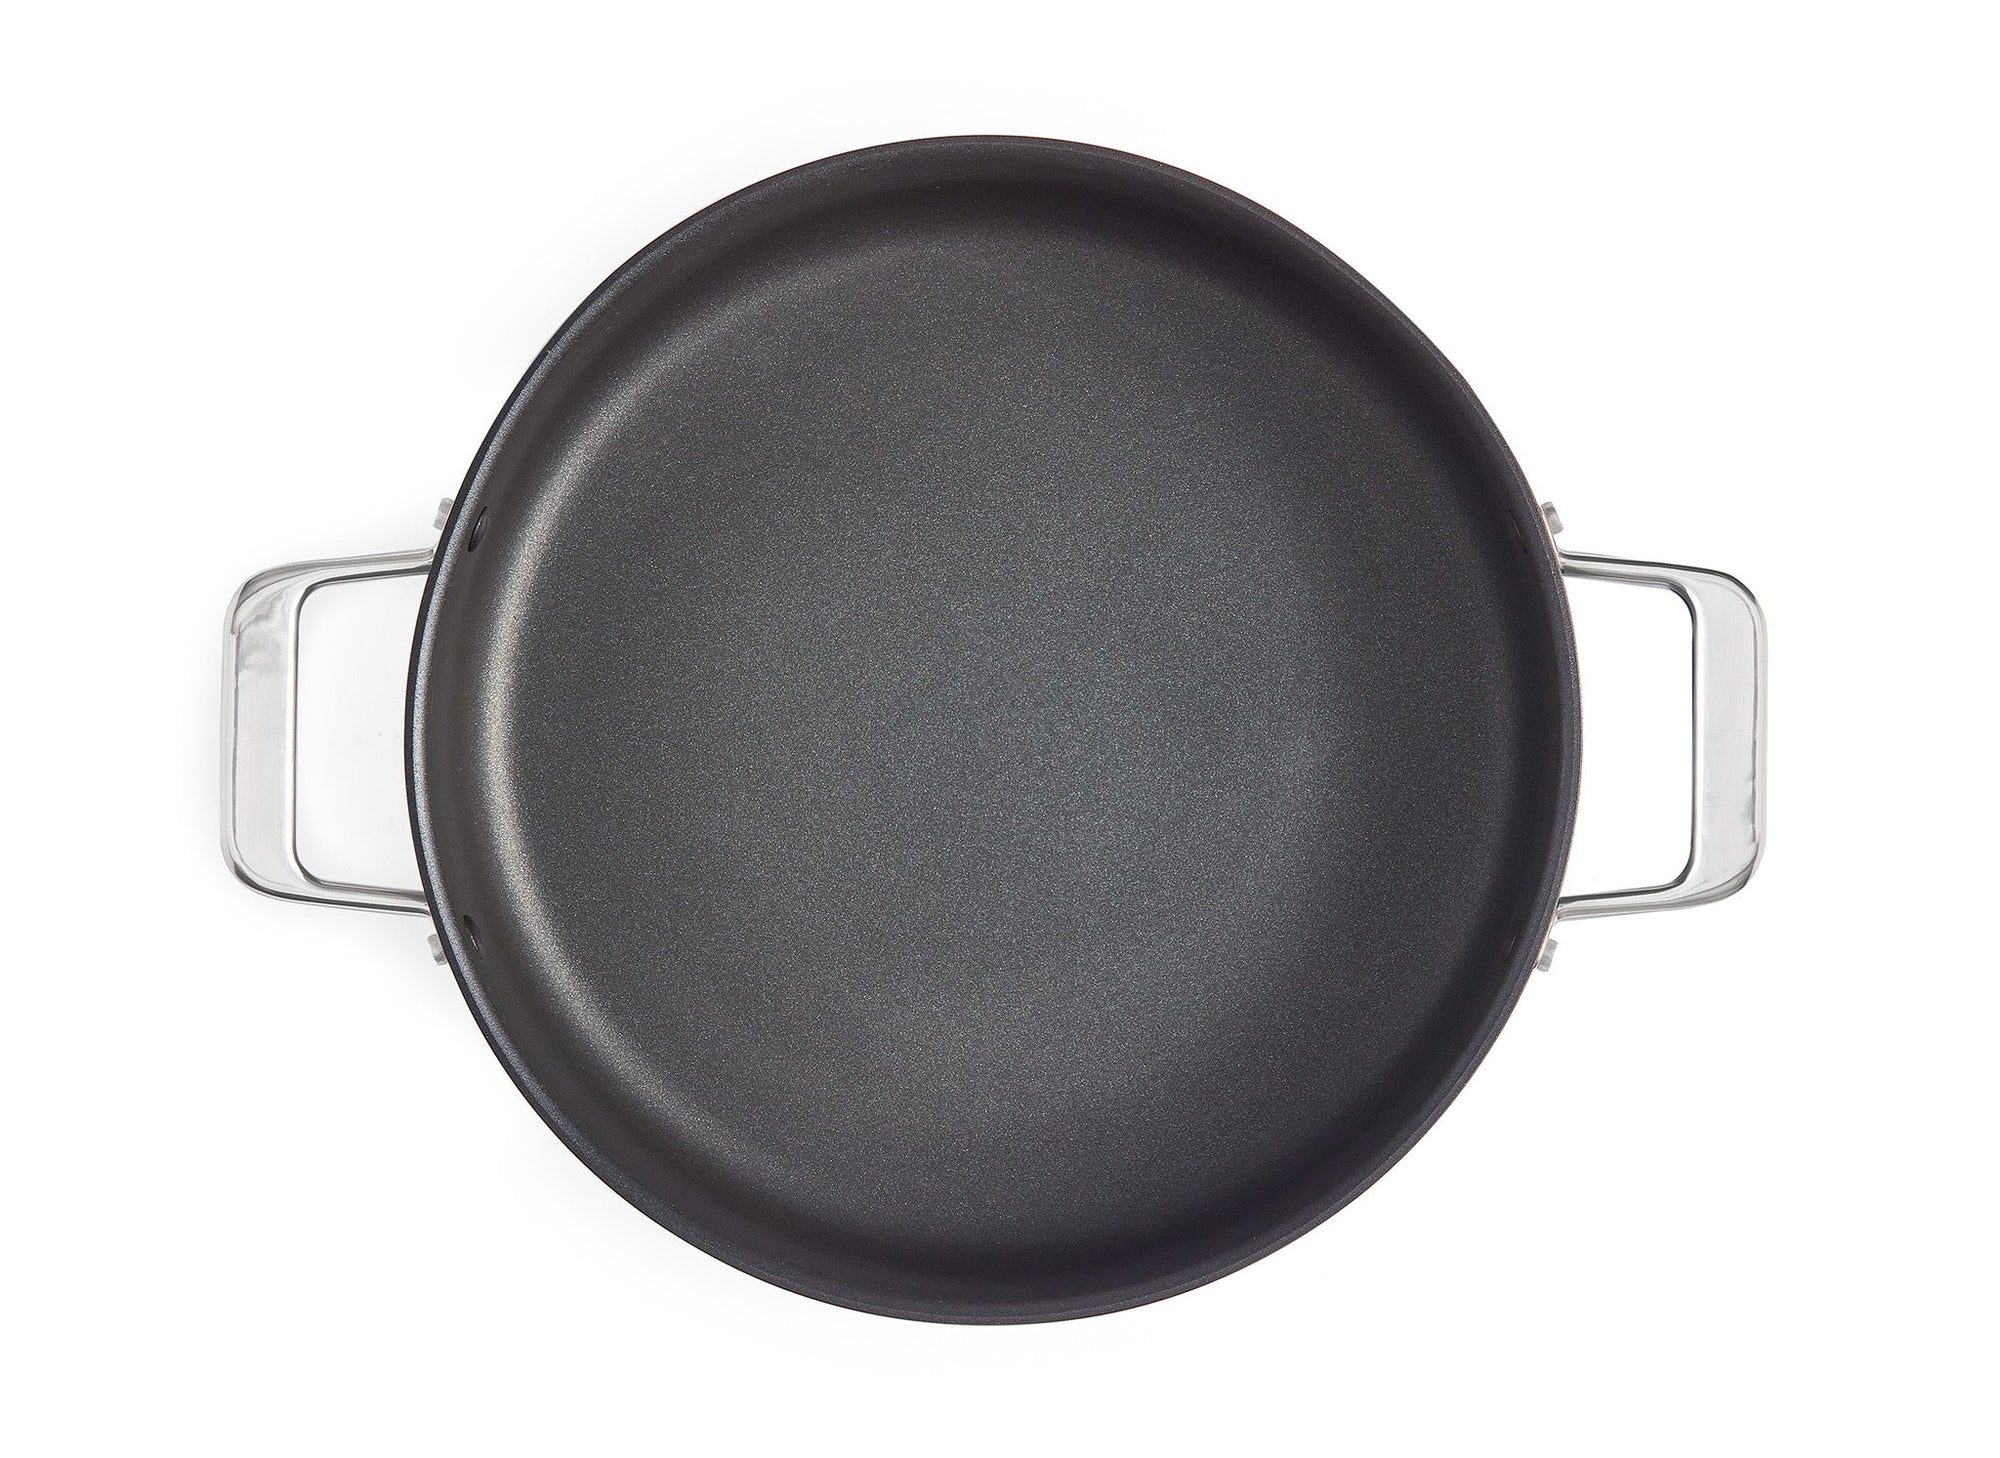 A bird’s eye view of the Misen Nonstick Rondeau with lid off, on a white background, with full view of the base of the pot.